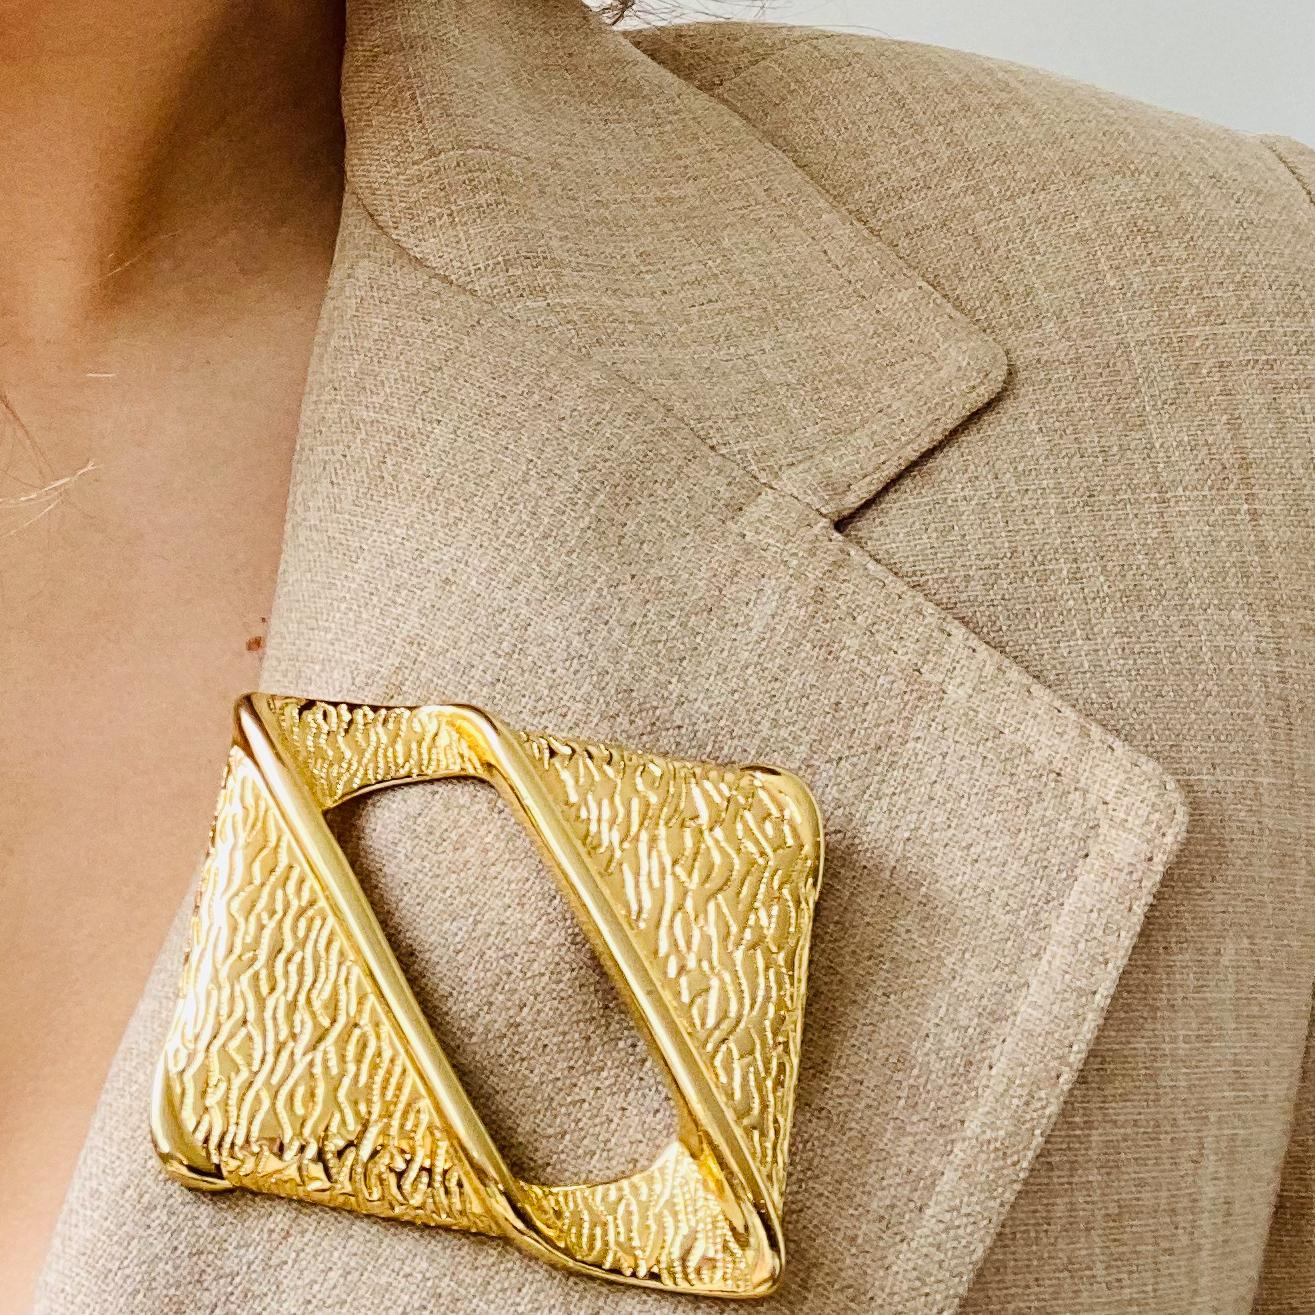 Givenchy Vintage 1980s Brooch

Incredible statement brooch from the iconic House of Hubert de Givenchy. Made in the US in the 1980s, this incredible brooch is cast from high quality gold plated metal. Guaranteed to elevate your favourite blazers and